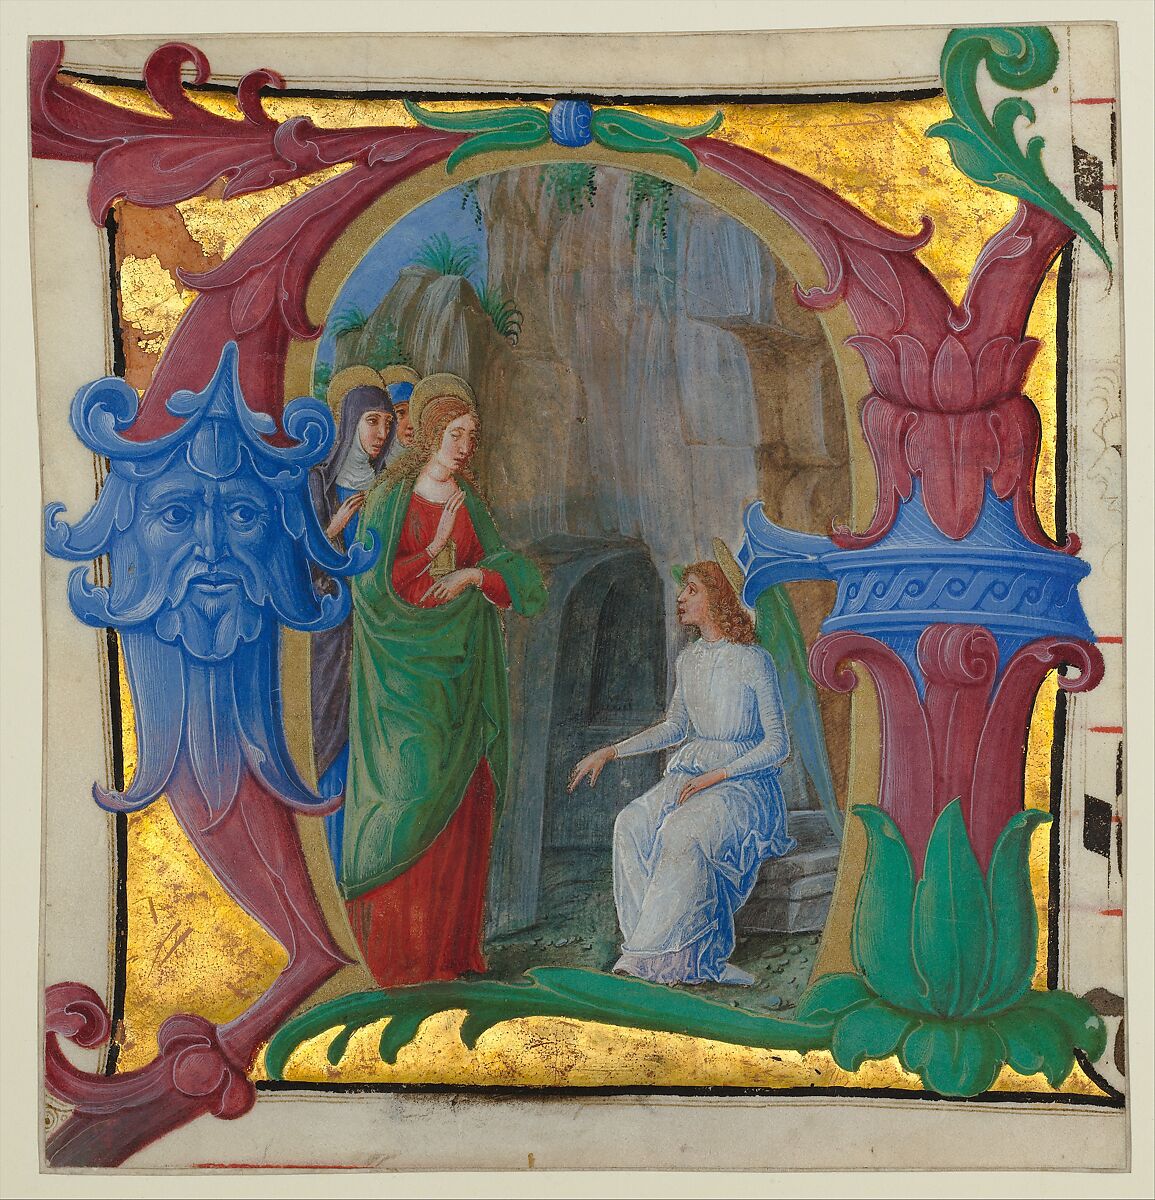 Manuscript Illumination with the Holy Women at the Tomb in an Initial A, from an Antiphonary, Girolamo dai Libri (Italian, Verona 1474–1555 Verona), Tempera, gold, and ink on parchment, Italian 